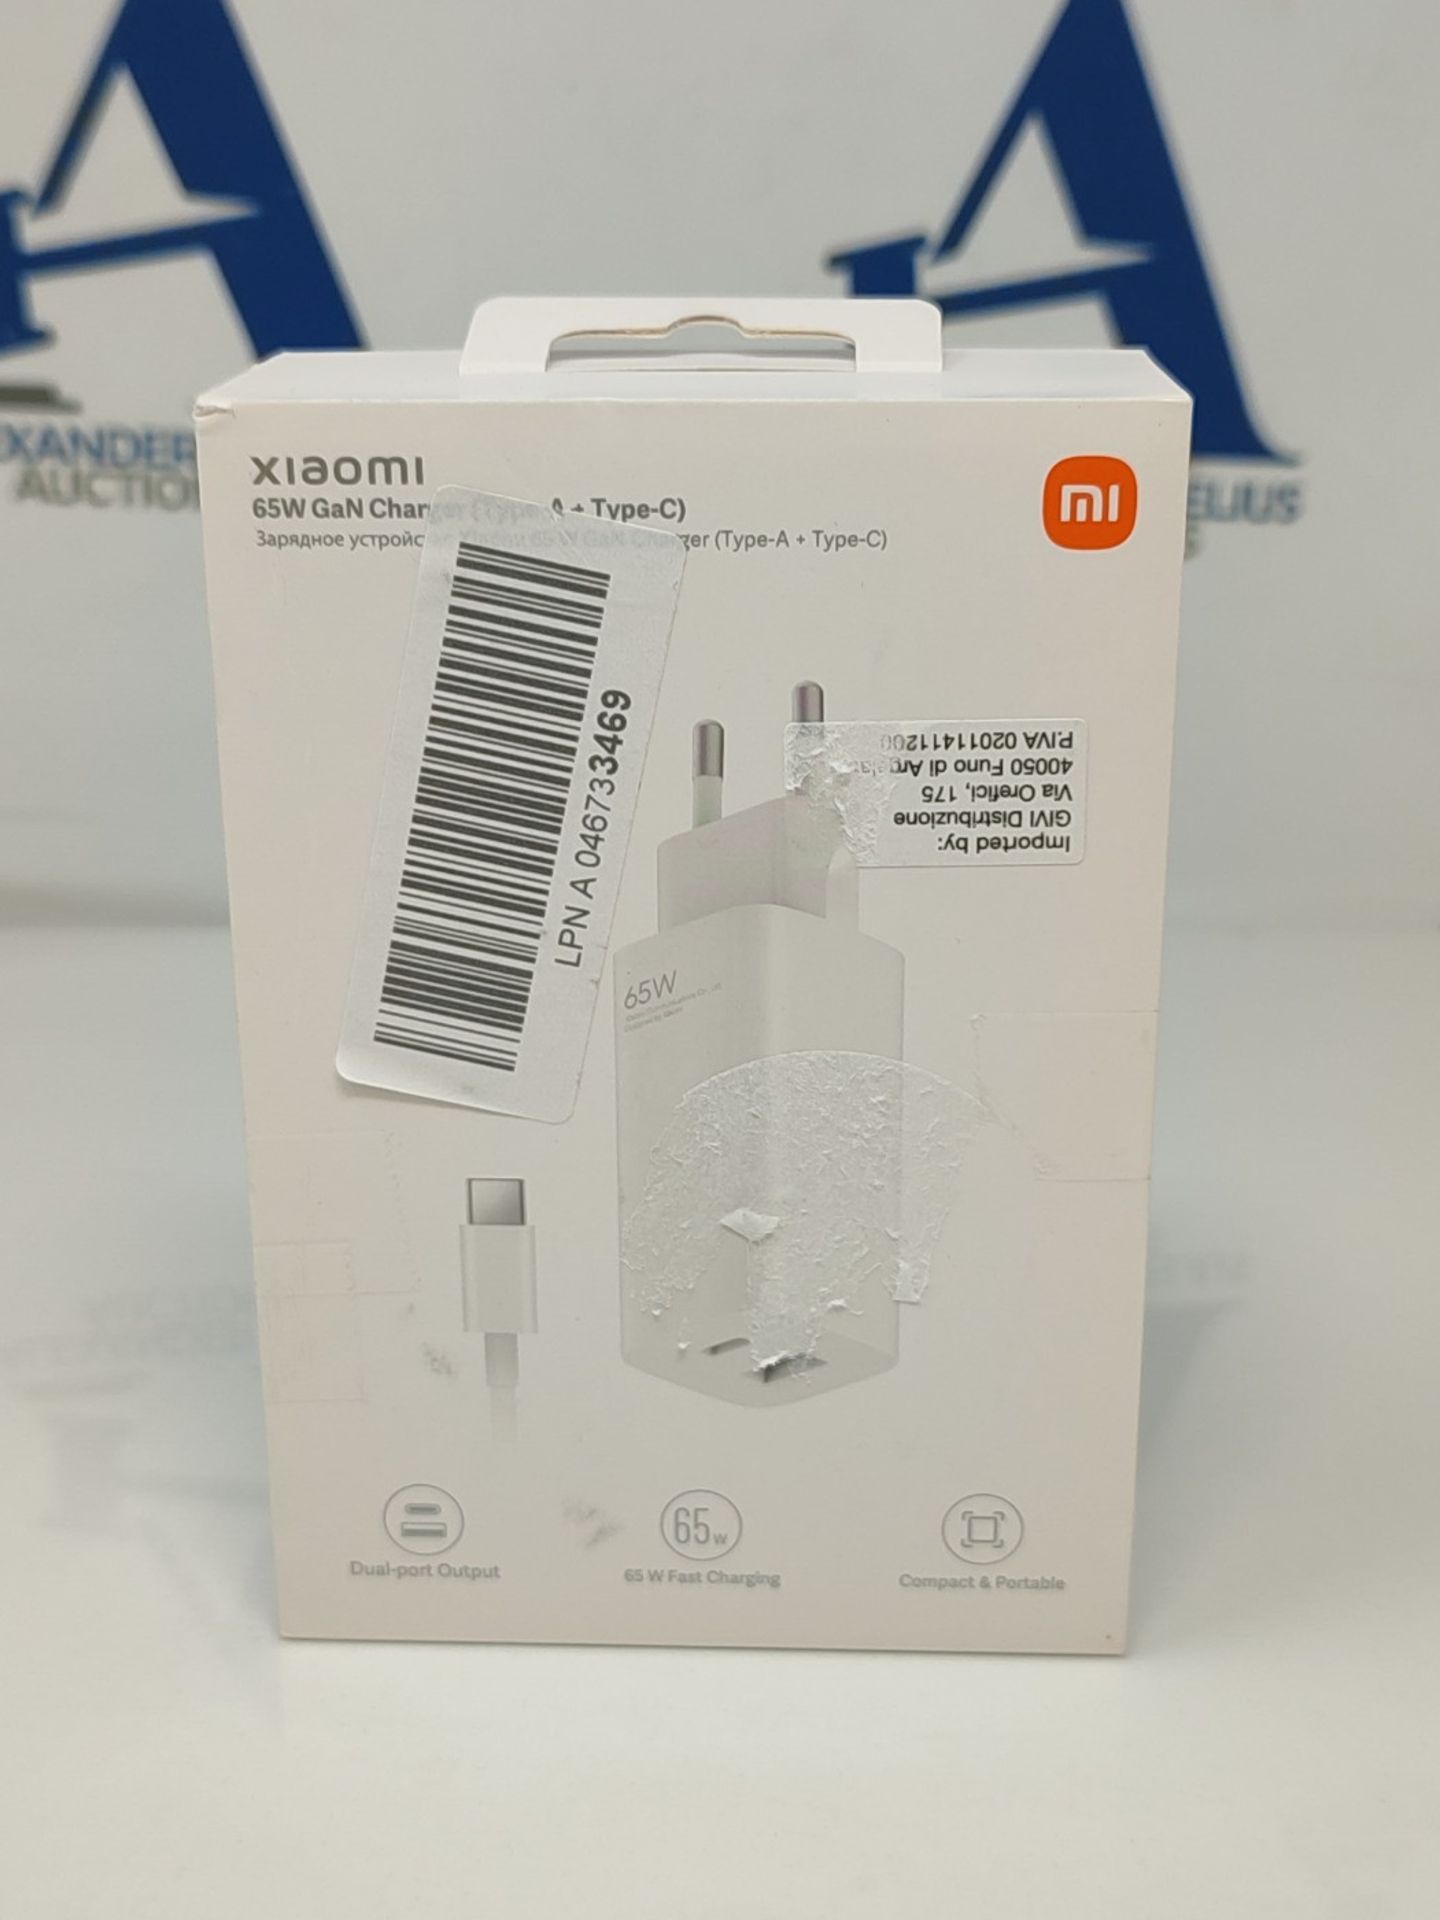 Xiaomi 65W Fast Charger with GaN technology Supports Type-A + Type-C Inputs, Charger f - Image 2 of 3